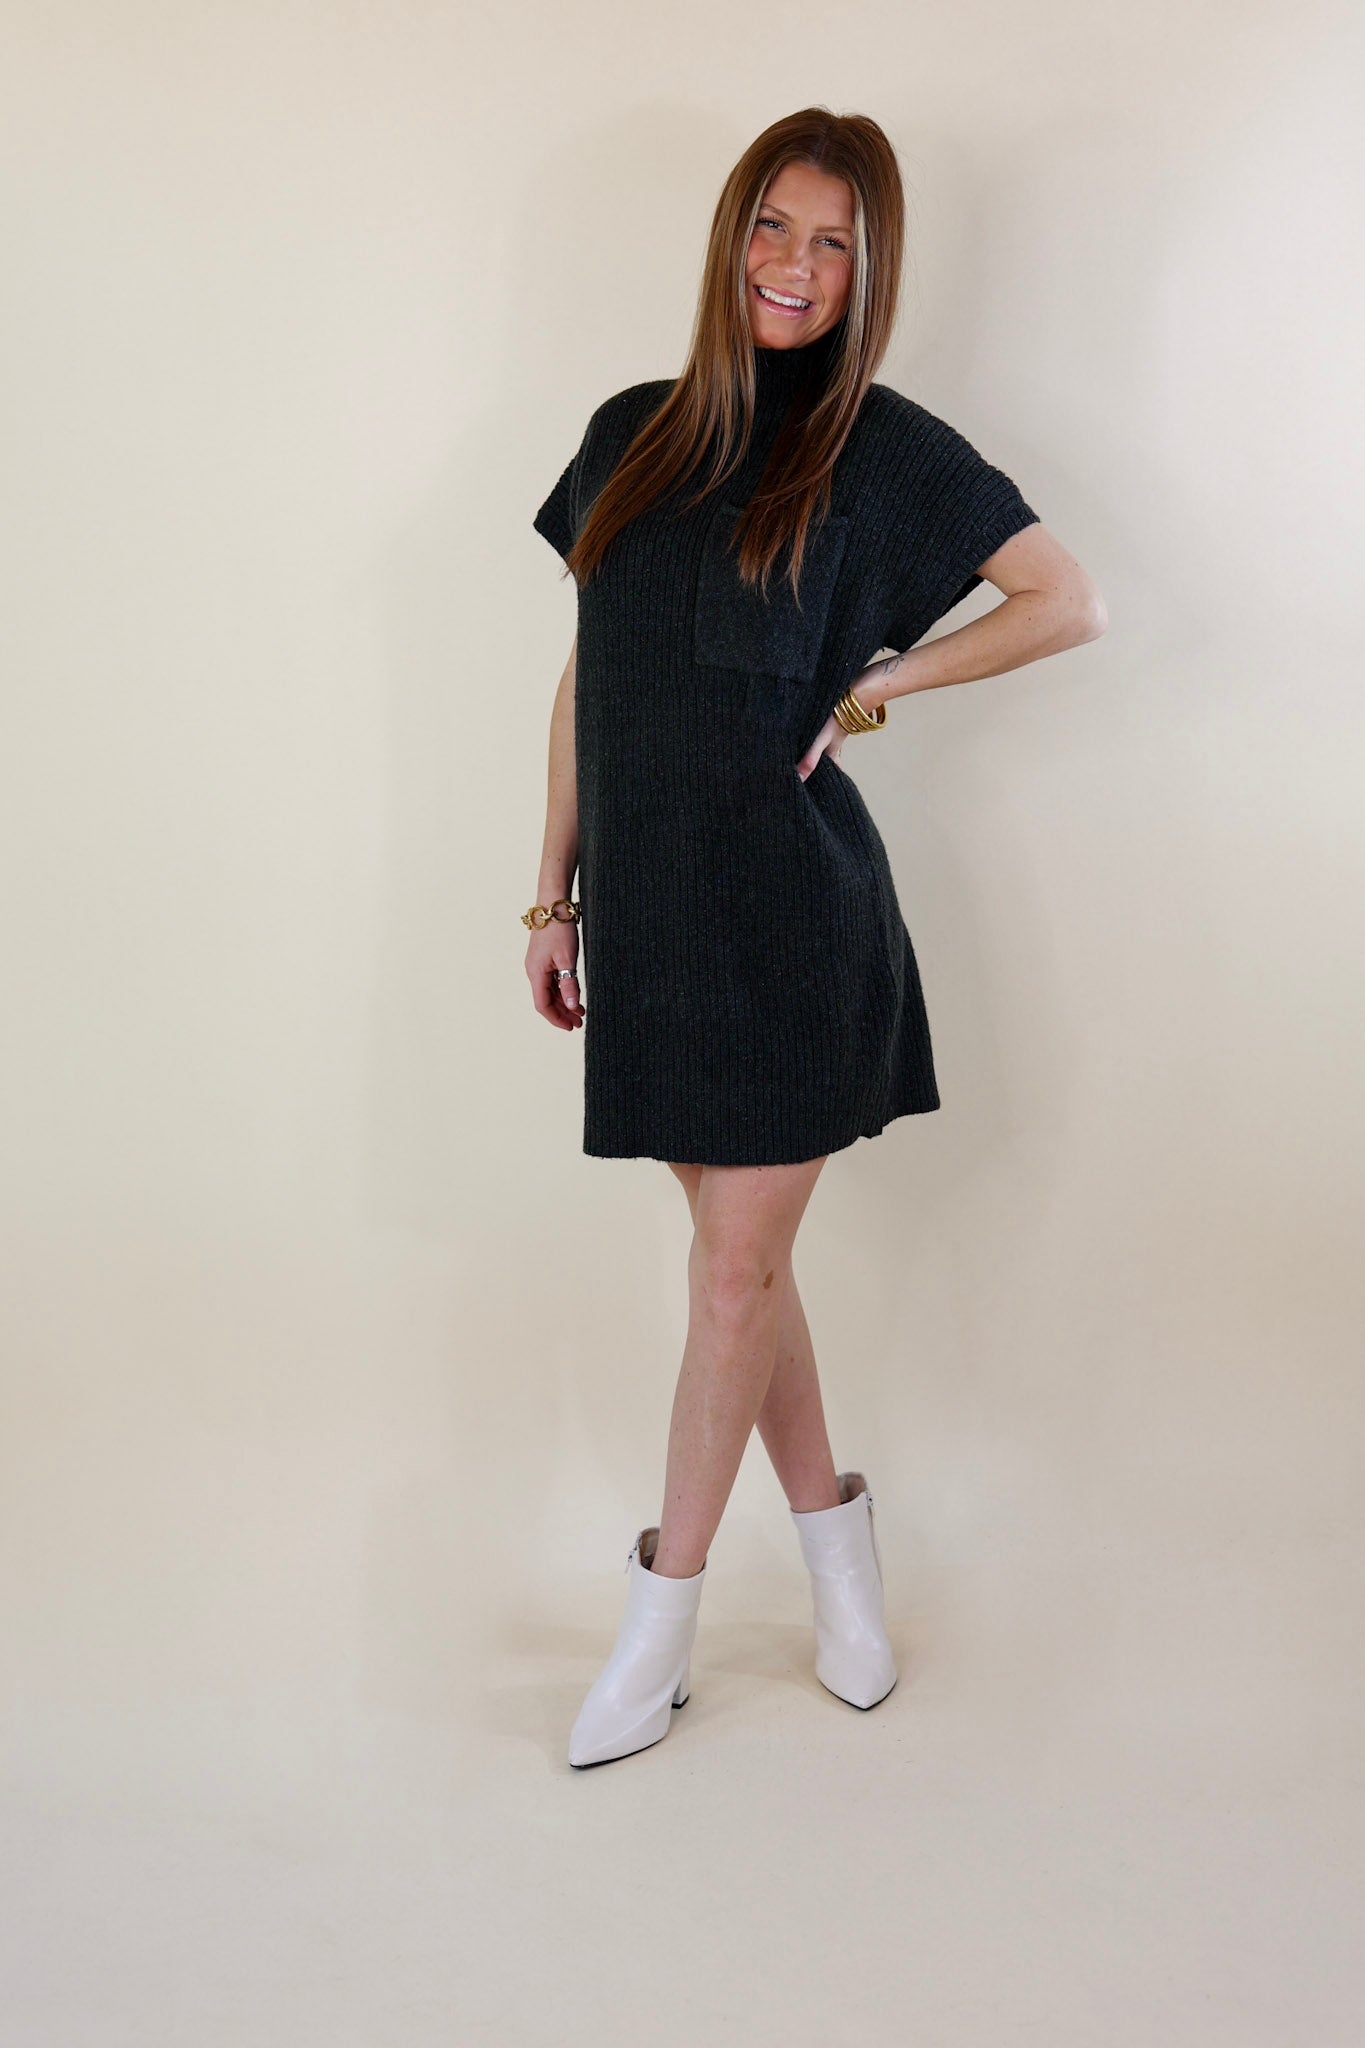 City Sights Cap Sleeve Sweater Dress in Charcoal Black - Giddy Up Glamour Boutique